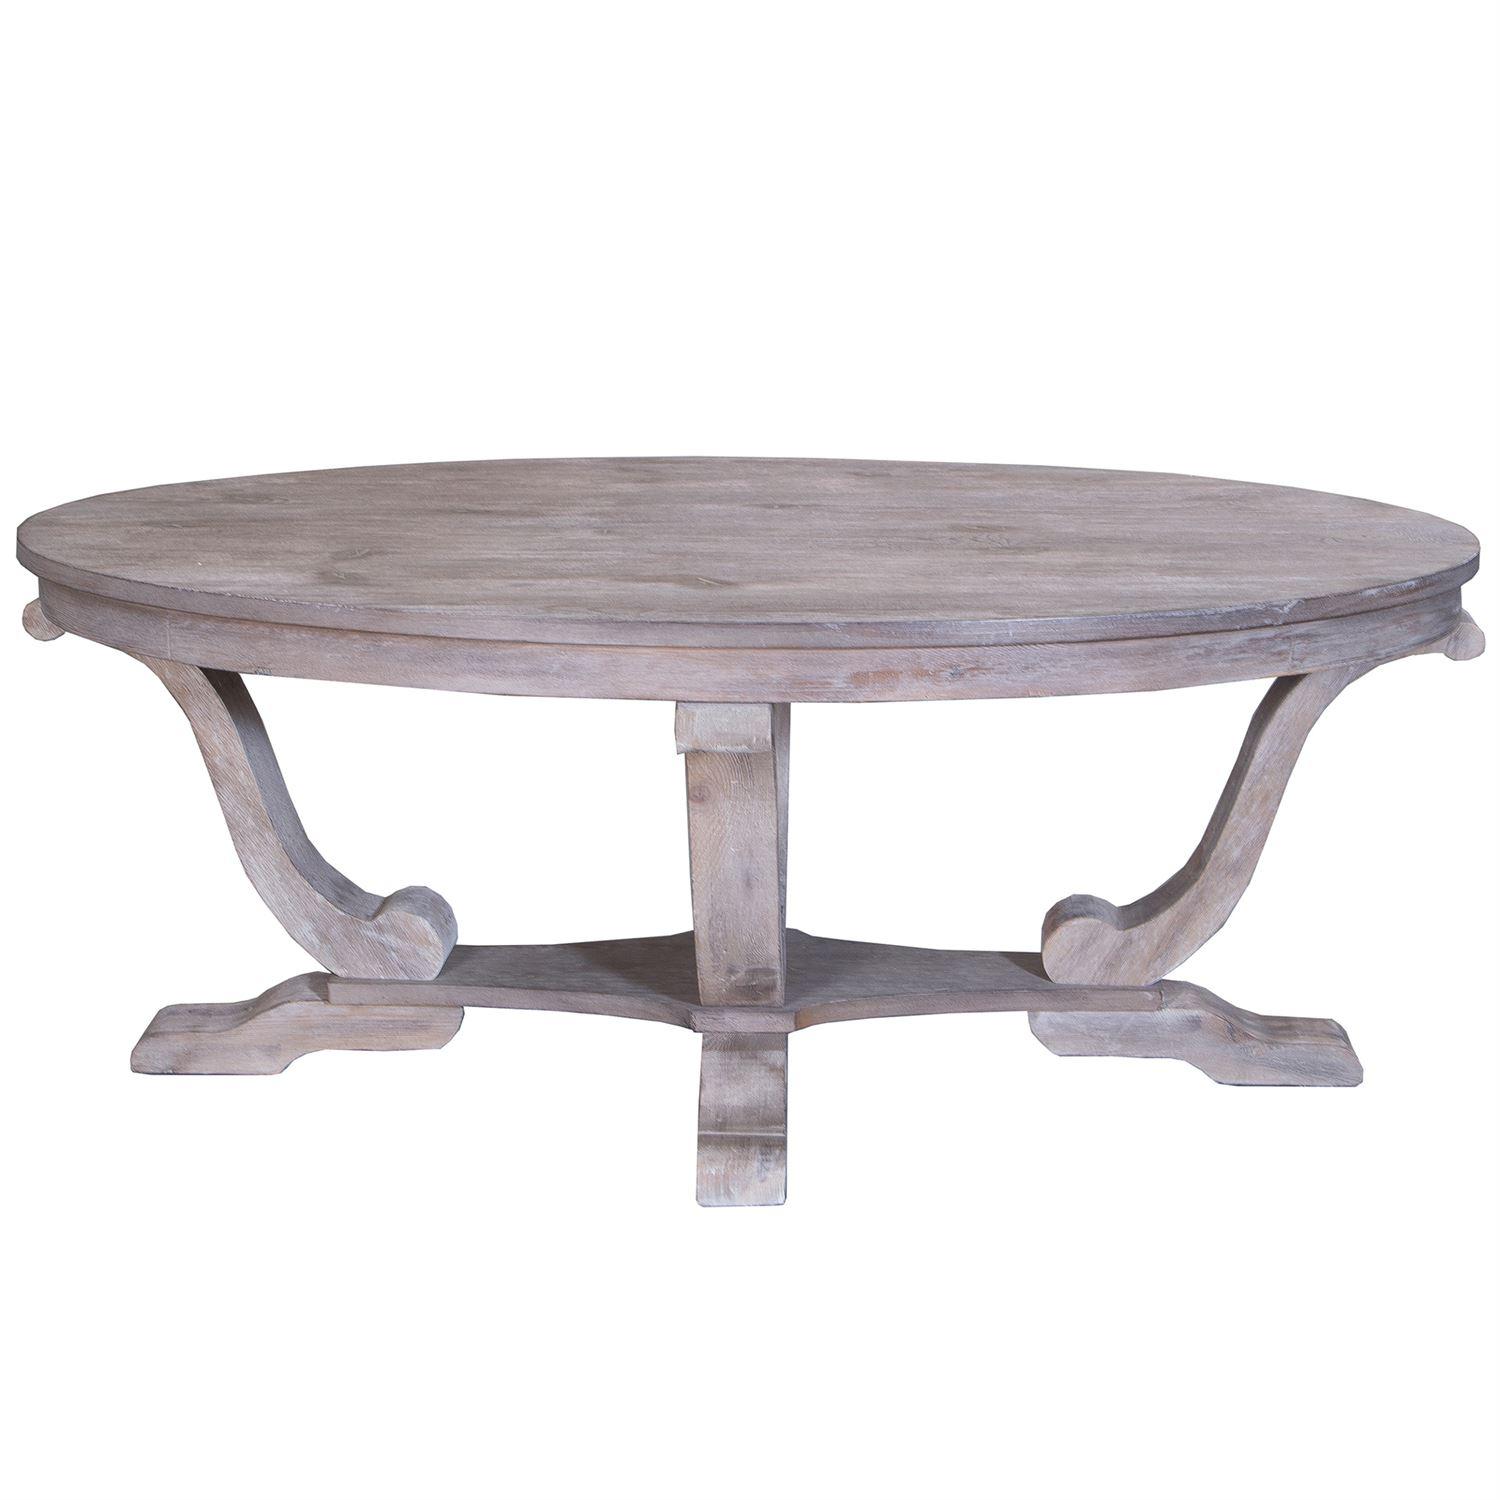 Traditional Coffee Table Greystone Mill  (154-OT) Coffee Table 154-OT1010 in White Brushed Technique For Rustic Feel